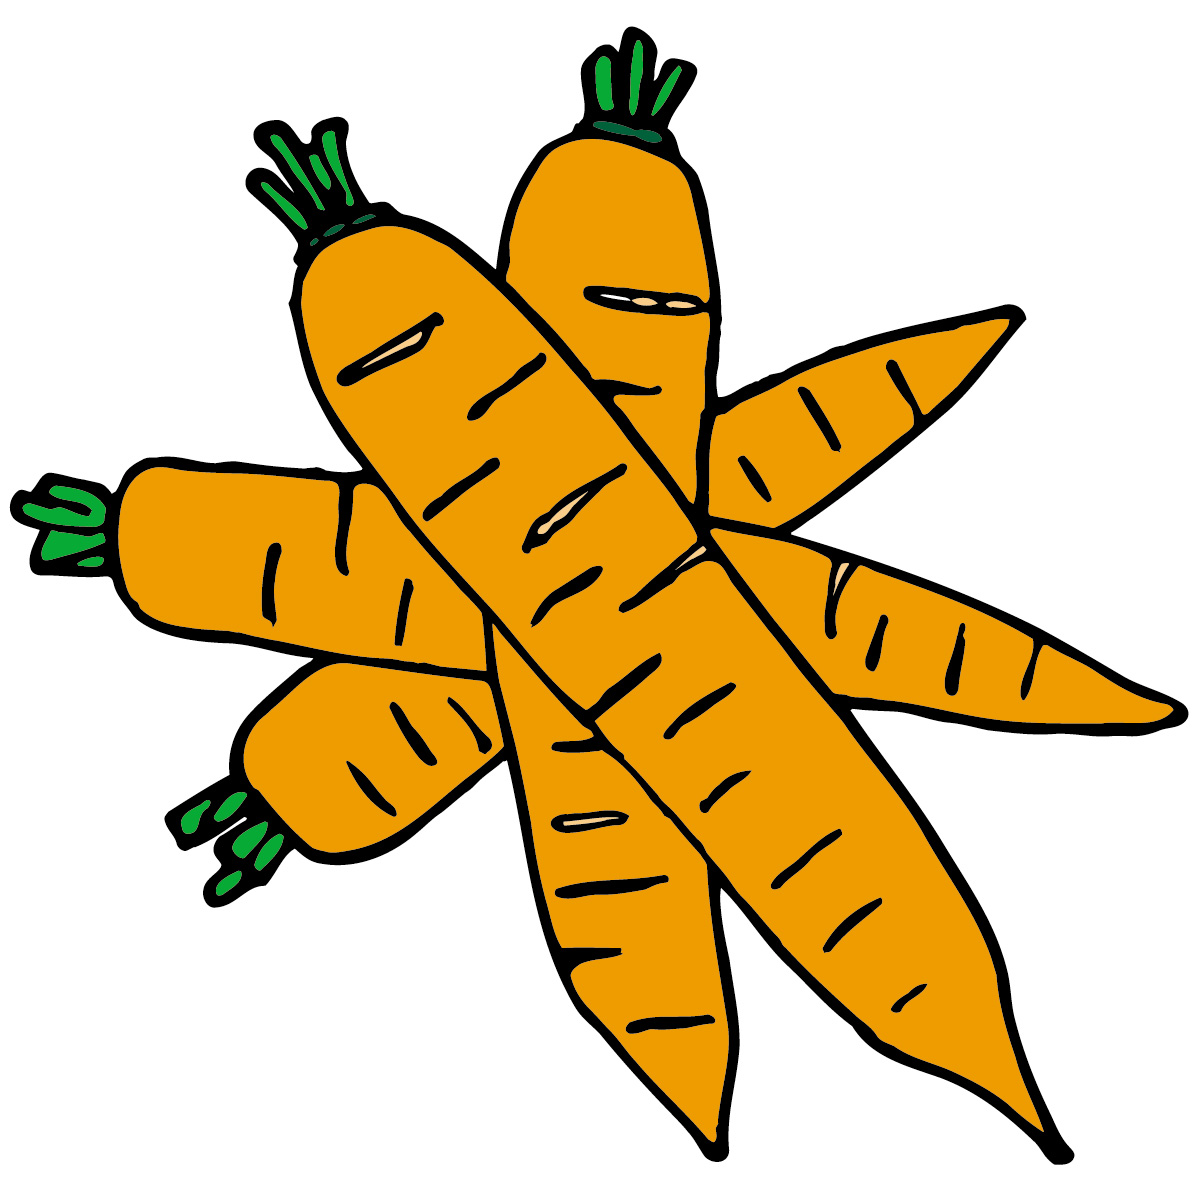 fruits clipart images - photo #40